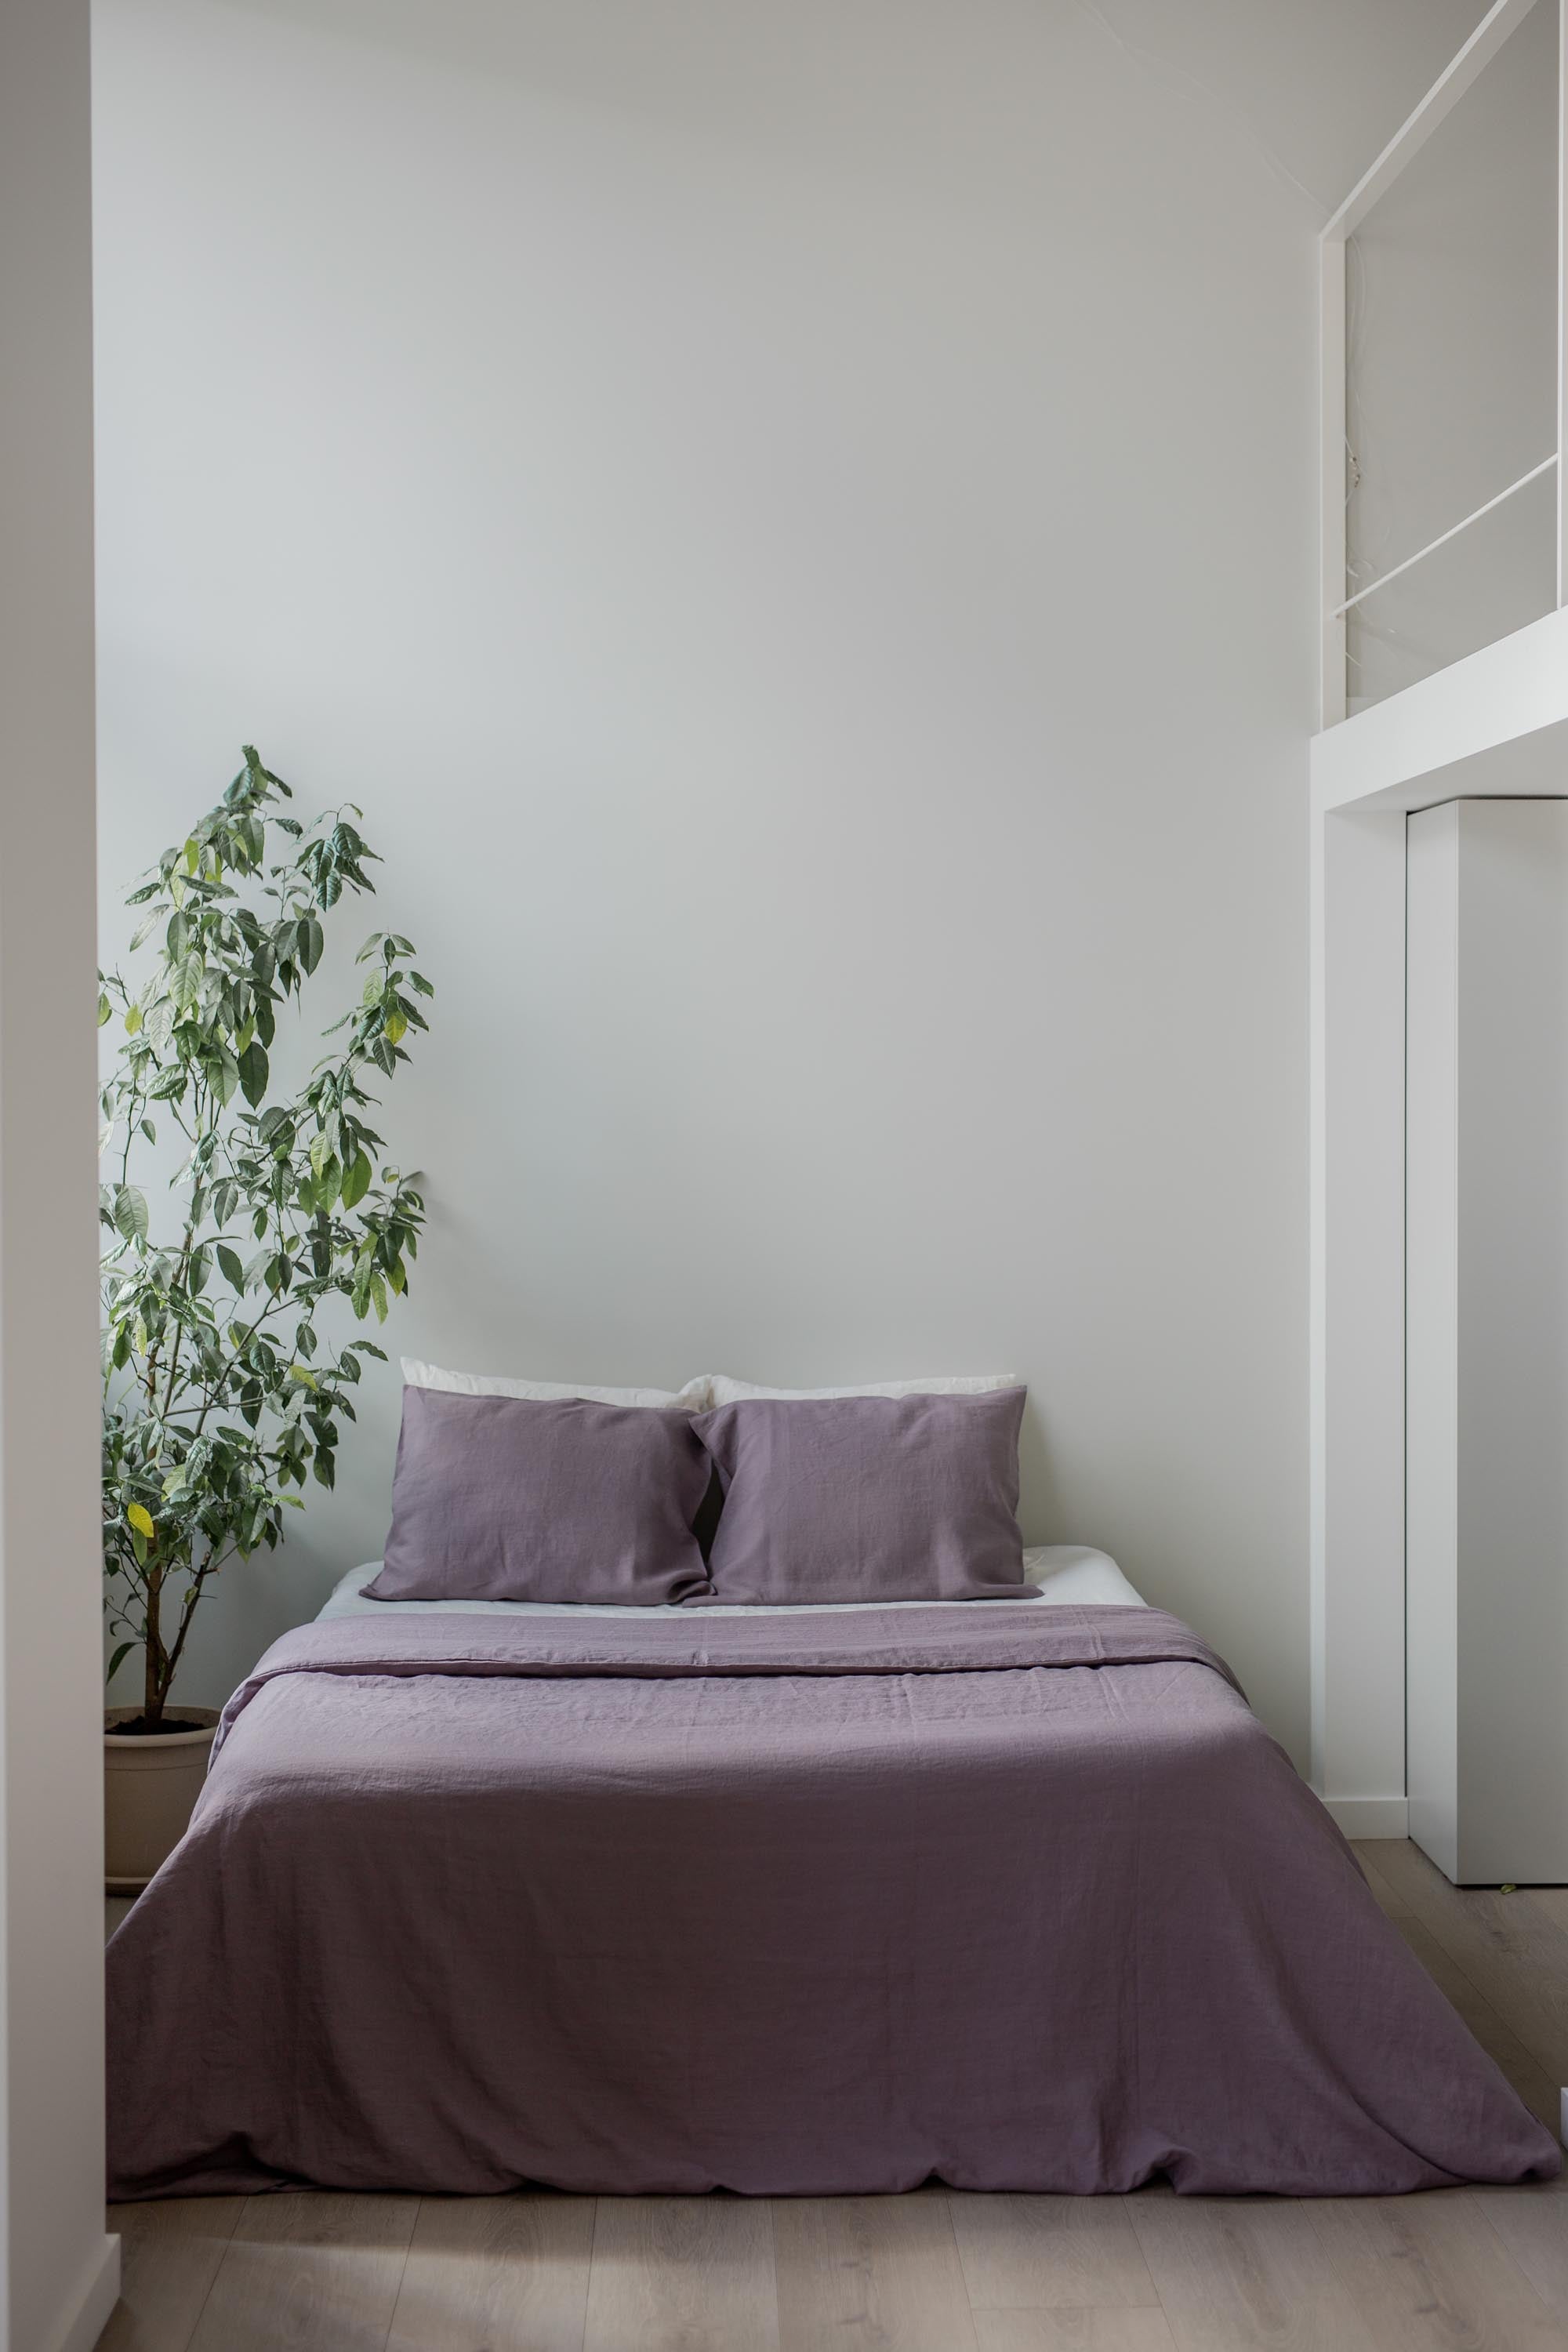 Bed With Dusty Lavender Linen Duvet Cover By AmourlInen